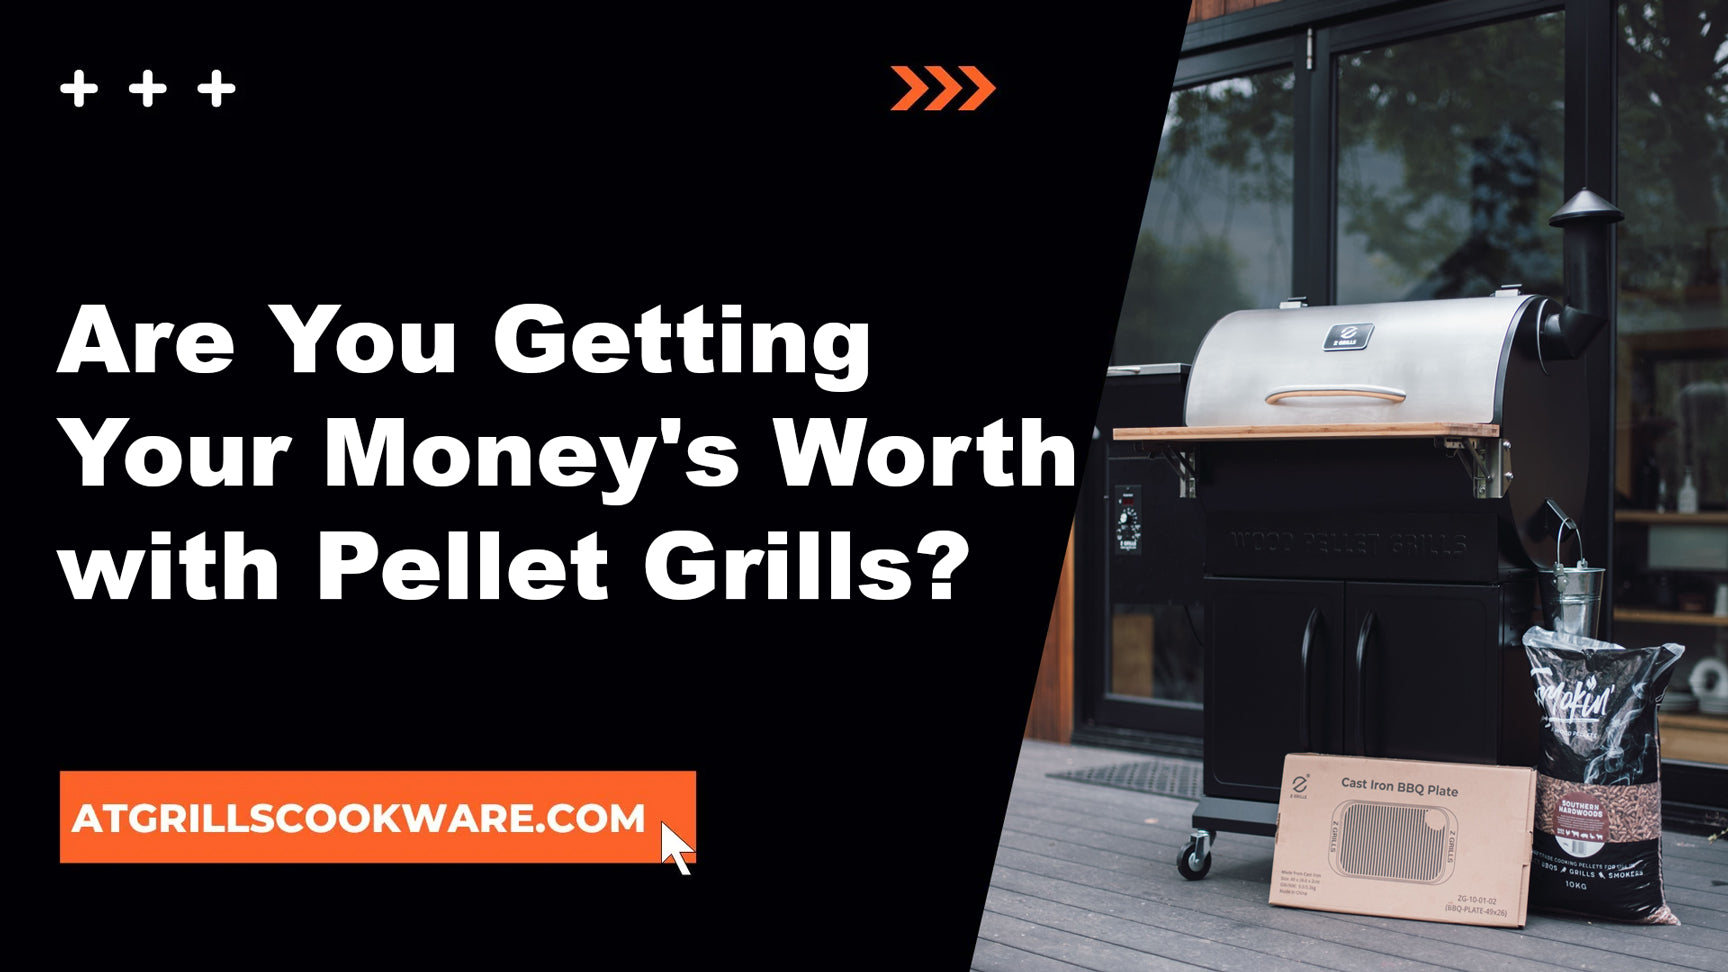 Are You Getting Your Money's Worth with Pellet Grills?